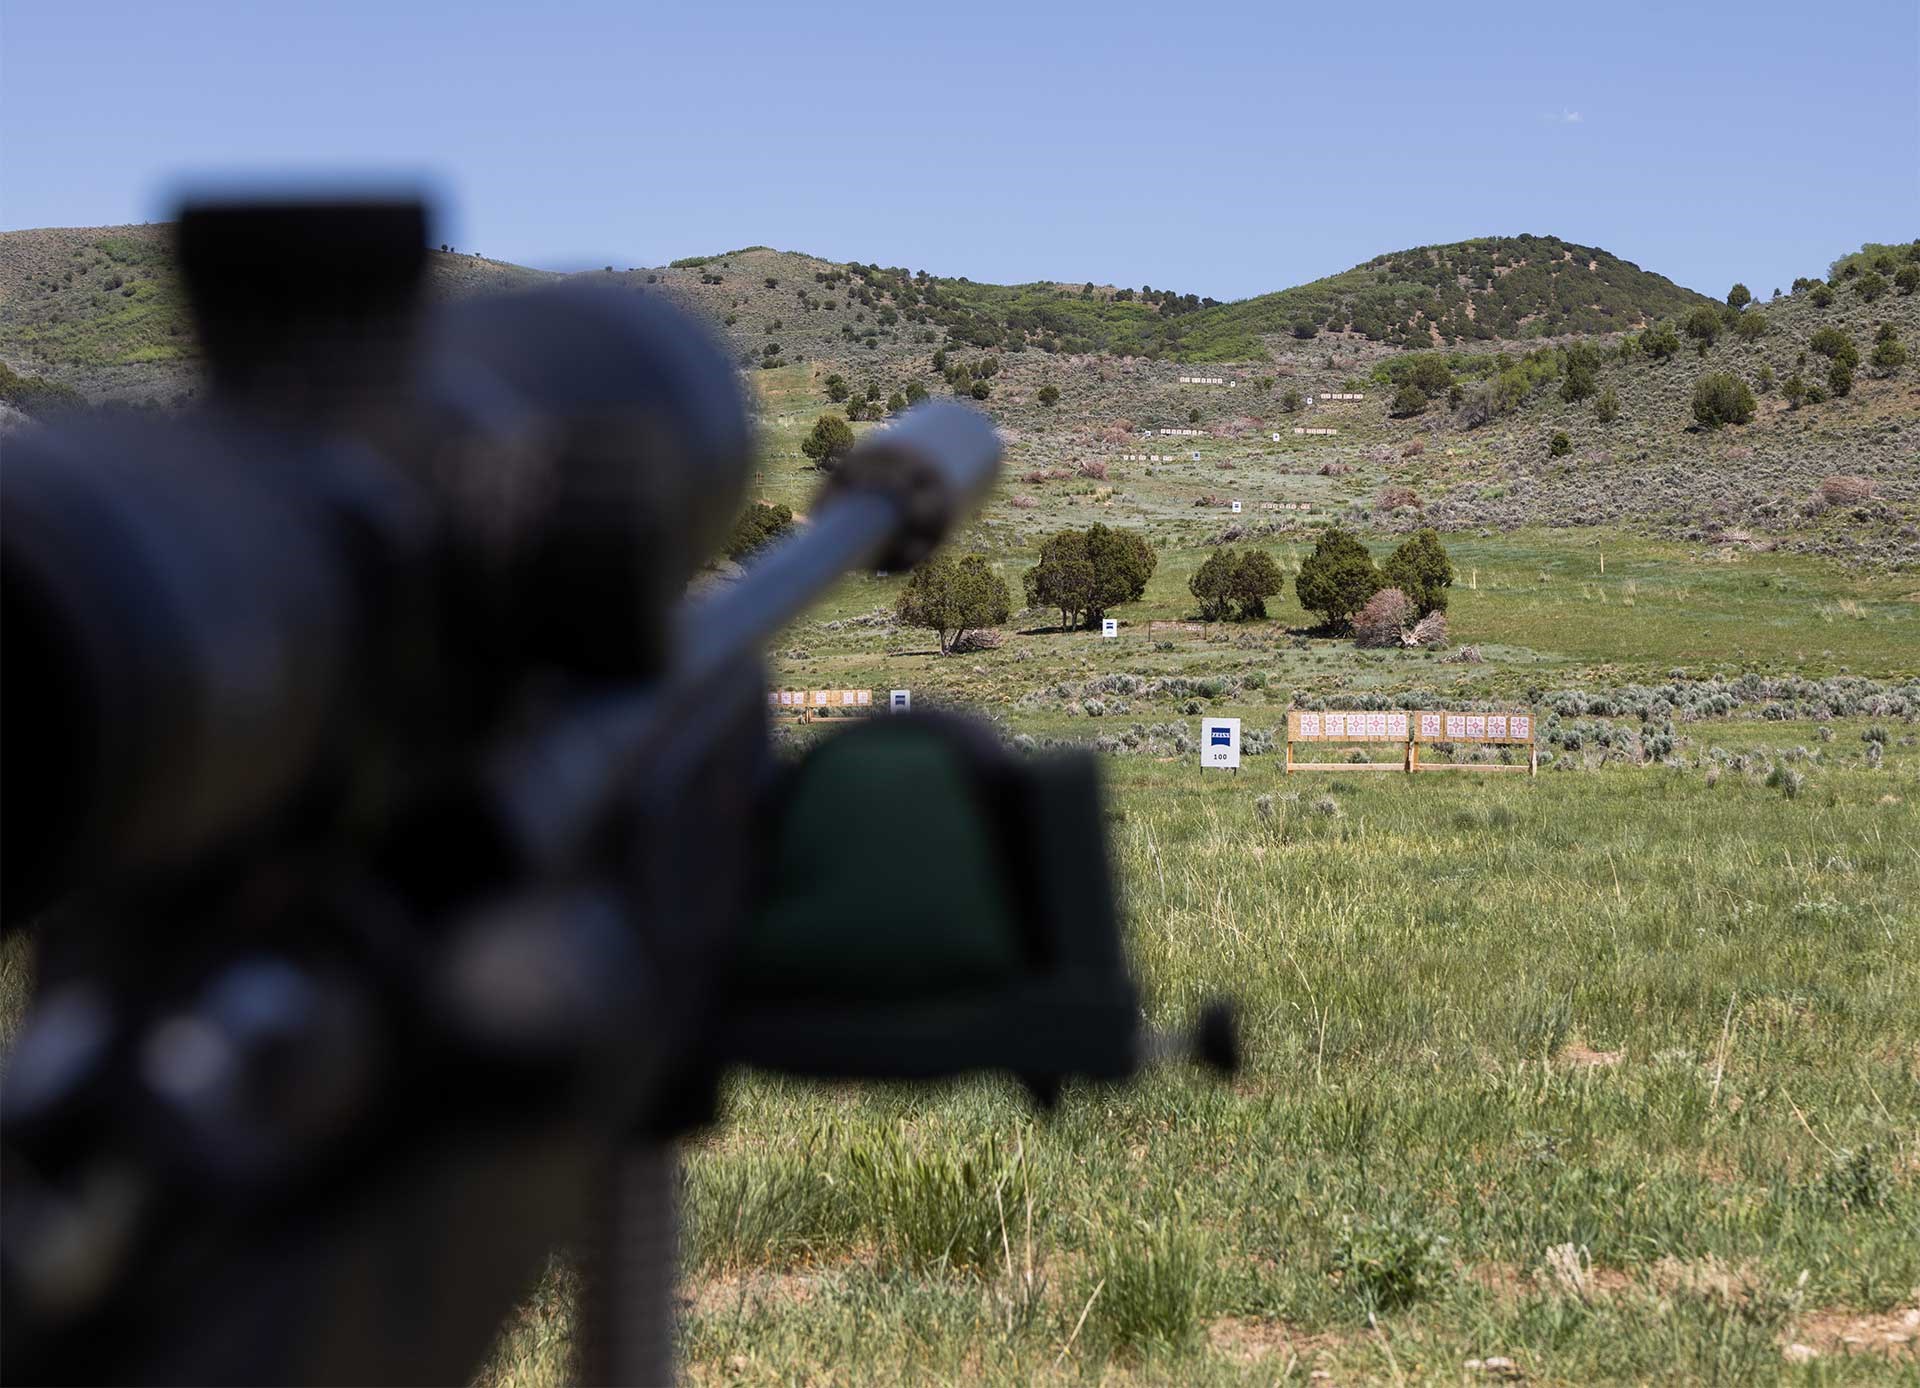 A rifle barrel and scope are seen in the foreground, while targets dot a hillside in the background.